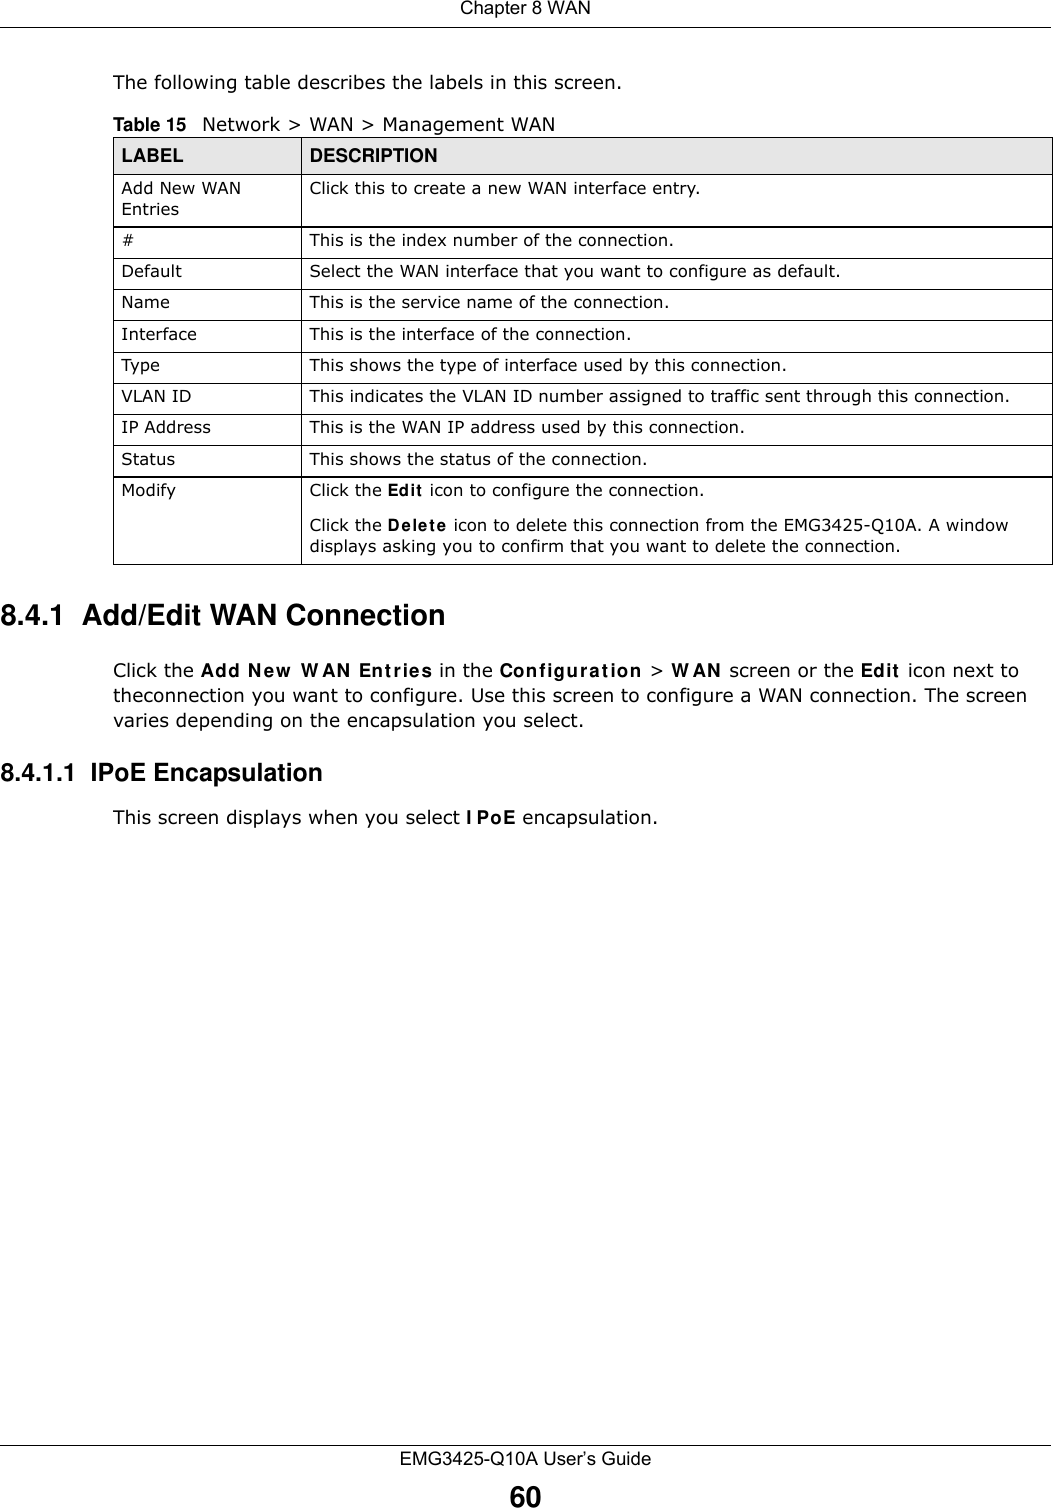 Chapter 8 WANEMG3425-Q10A User’s Guide60The following table describes the labels in this screen.8.4.1  Add/Edit WAN ConnectionClick the Add N e w  W AN  Entrie s in the Configurat ion &gt; W AN  screen or the Edit  icon next to theconnection you want to configure. Use this screen to configure a WAN connection. The screen varies depending on the encapsulation you select. 8.4.1.1  IPoE EncapsulationThis screen displays when you select I PoE encapsulation.Table 15   Network &gt; WAN &gt; Management WANLABEL DESCRIPTIONAdd New WAN EntriesClick this to create a new WAN interface entry.#This is the index number of the connection.Default Select the WAN interface that you want to configure as default.Name This is the service name of the connection.Interface This is the interface of the connection.Type This shows the type of interface used by this connection.VLAN ID This indicates the VLAN ID number assigned to traffic sent through this connection.IP Address This is the WAN IP address used by this connection.Status This shows the status of the connection.Modify Click the Edit icon to configure the connection.Click the Dele t e  icon to delete this connection from the EMG3425-Q10A. A window displays asking you to confirm that you want to delete the connection.